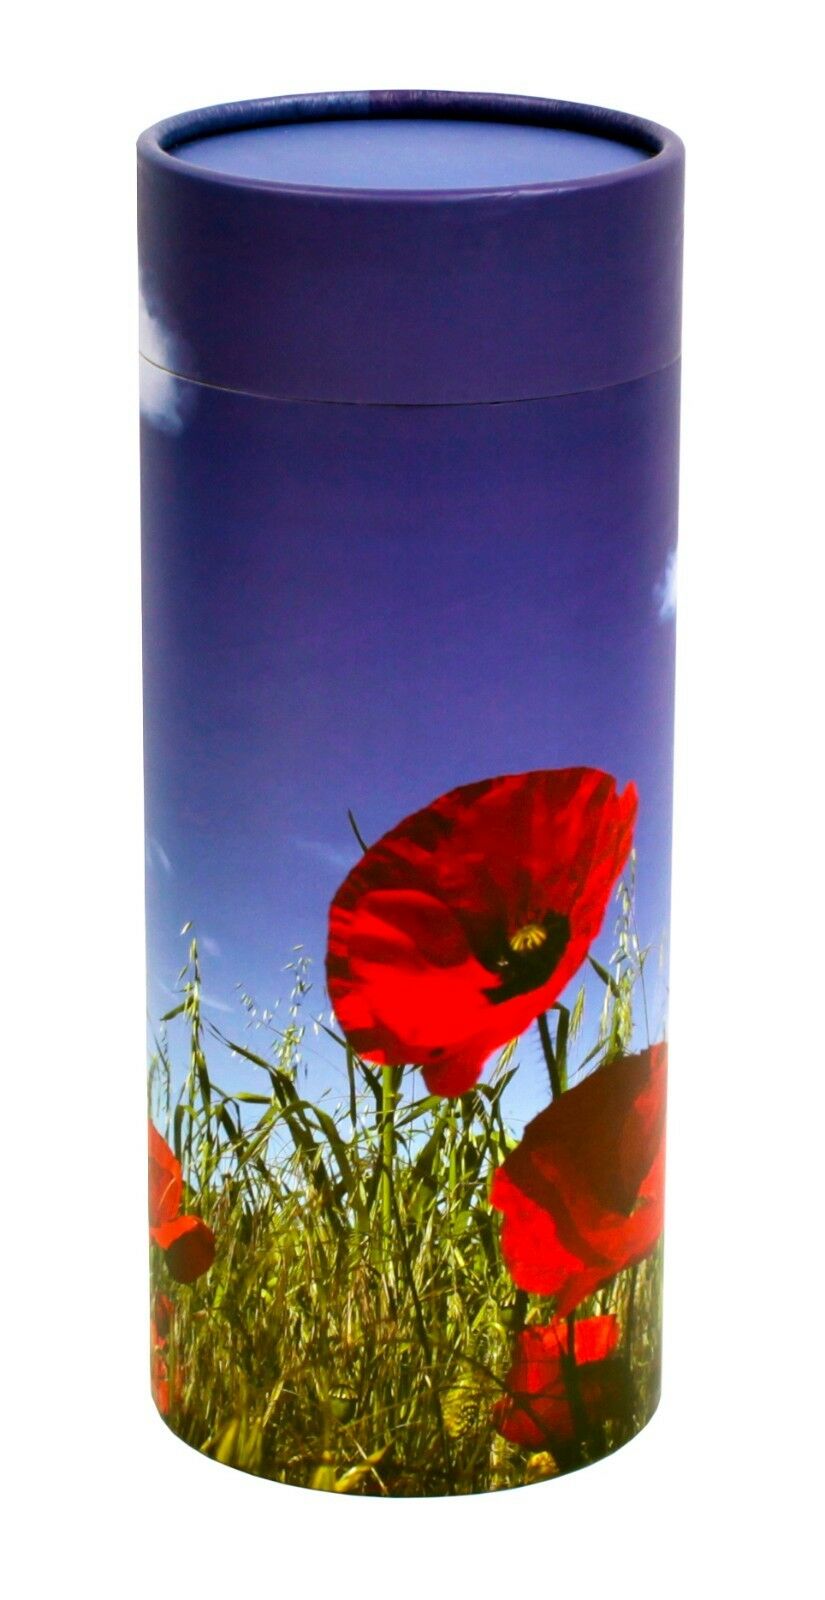 Biodegradable Ash Scattering Tube Funeral Cremation Urn - 200 cubic inches